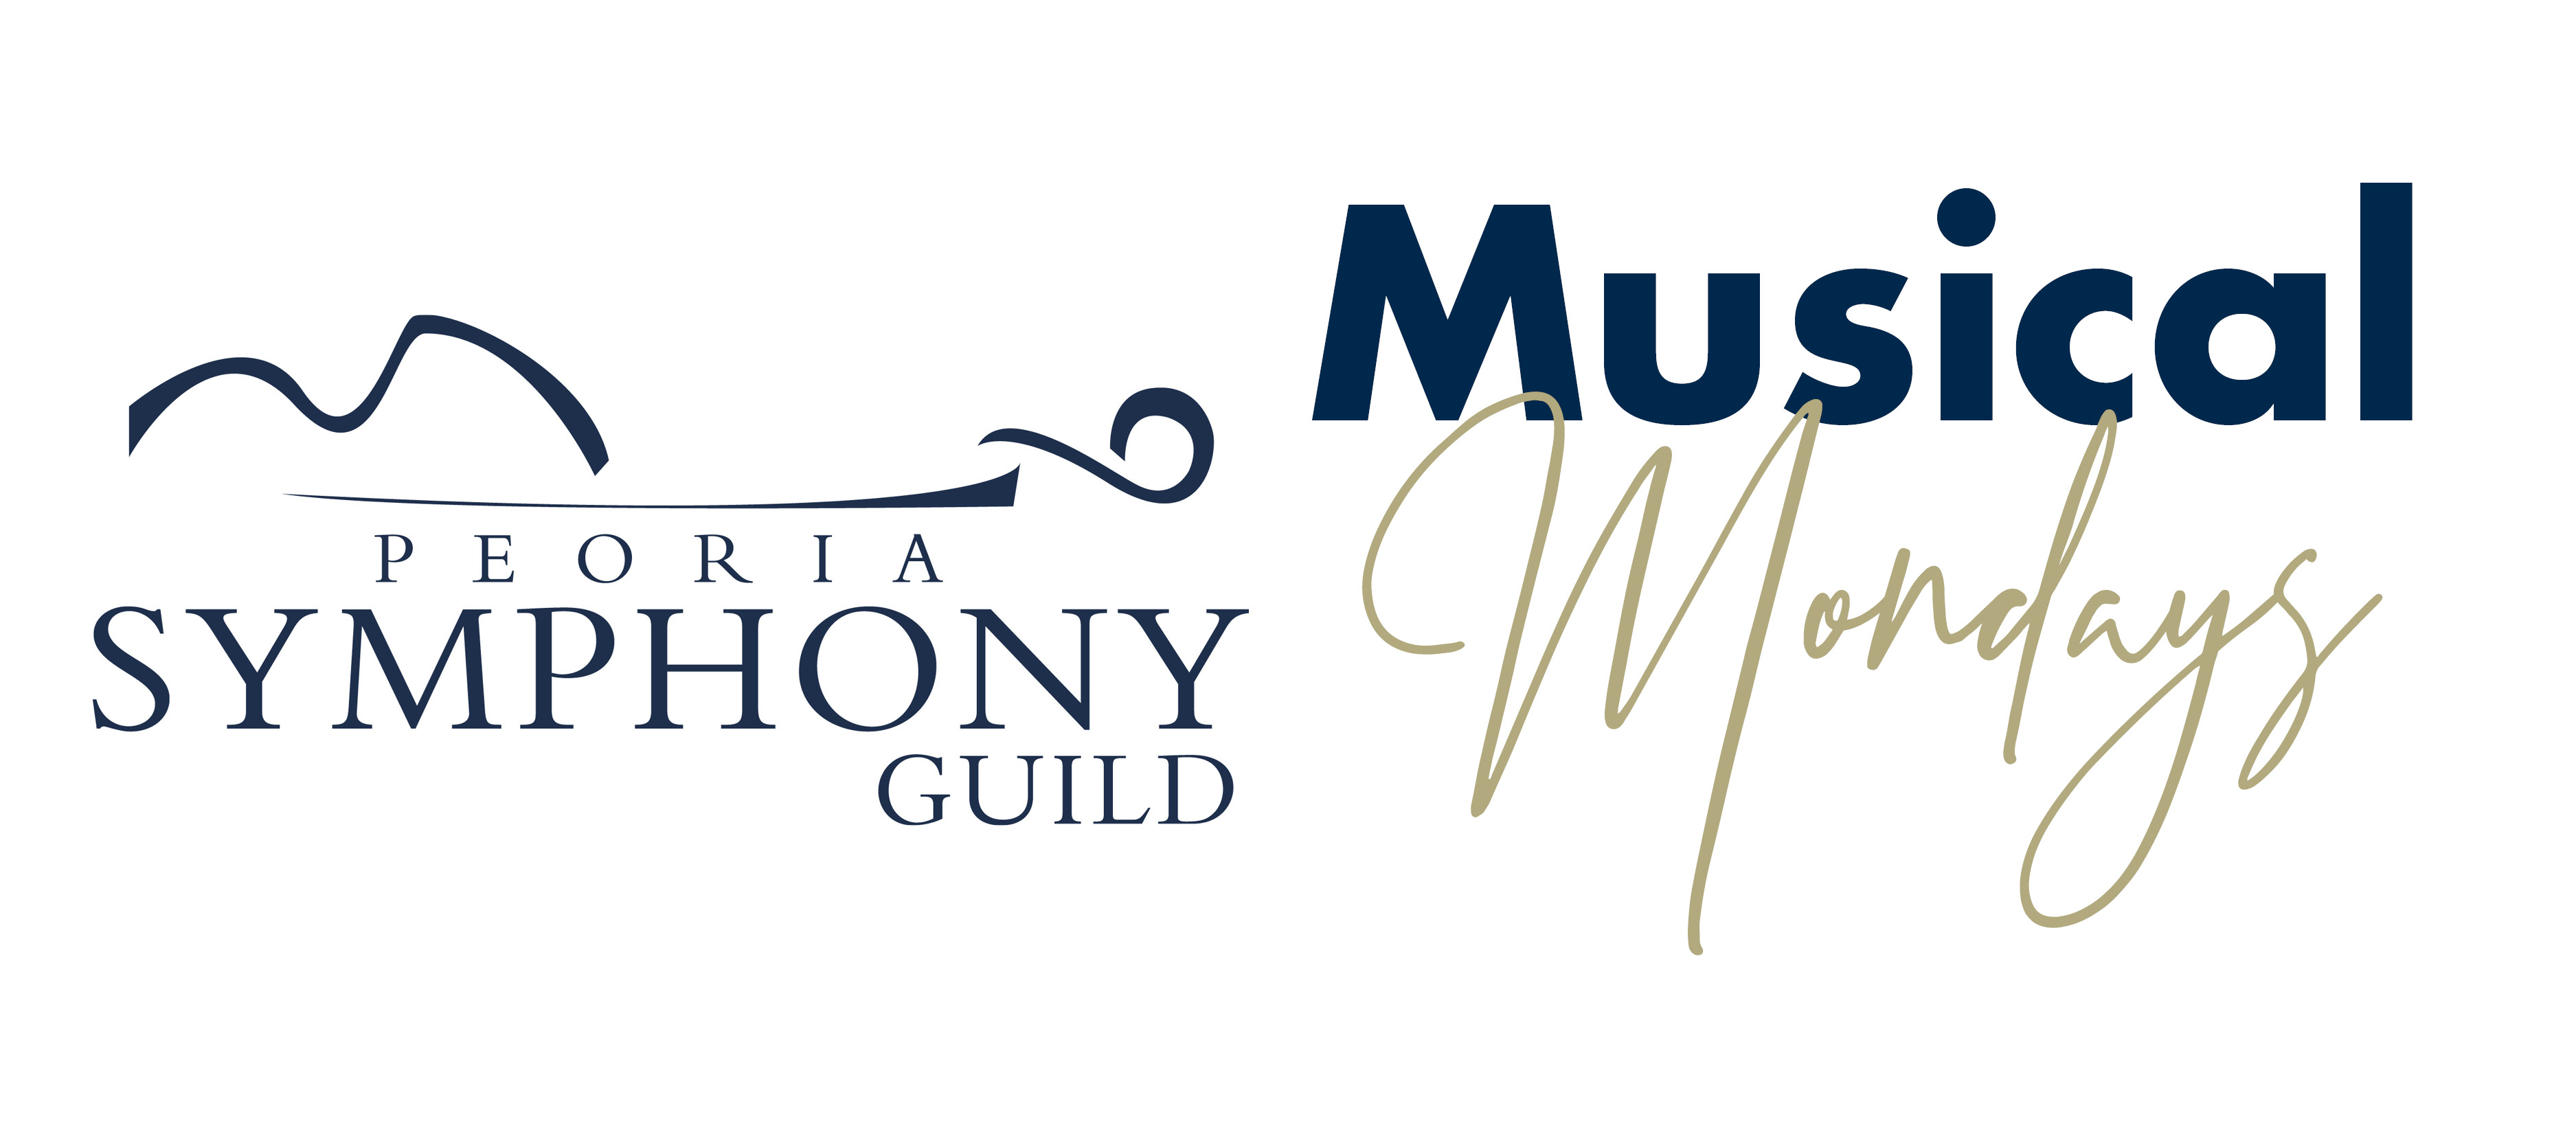 Symphony Guild Musical Monday: A Non-Classical Violin Journey